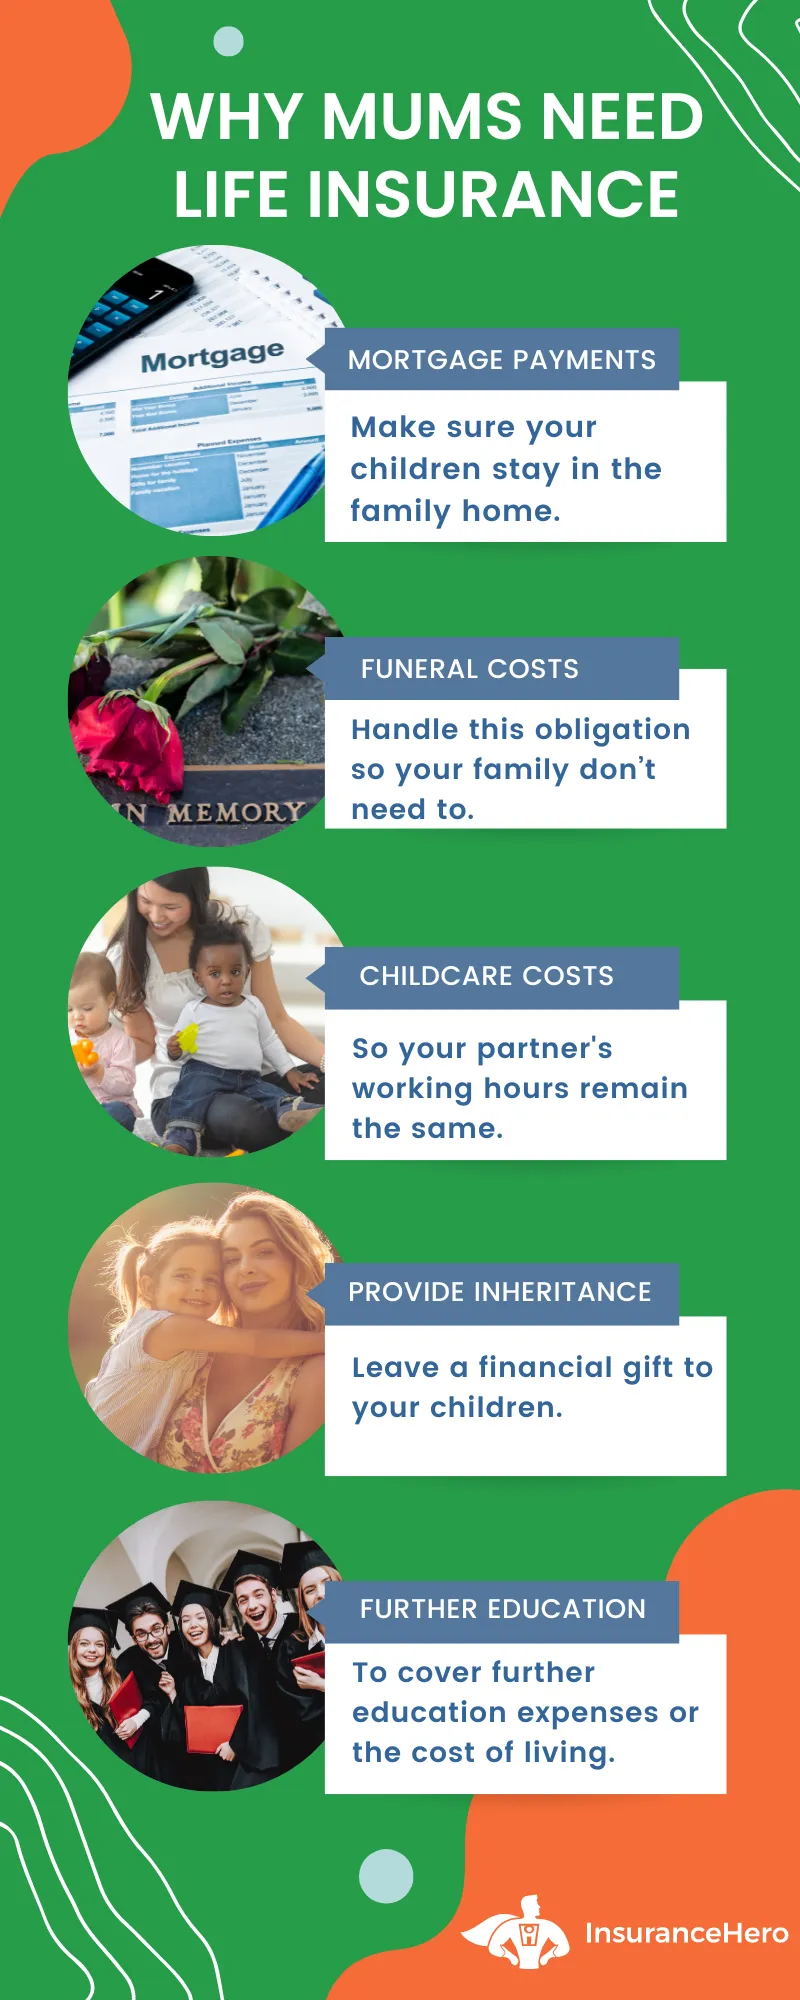 why mums need life insurance infographic